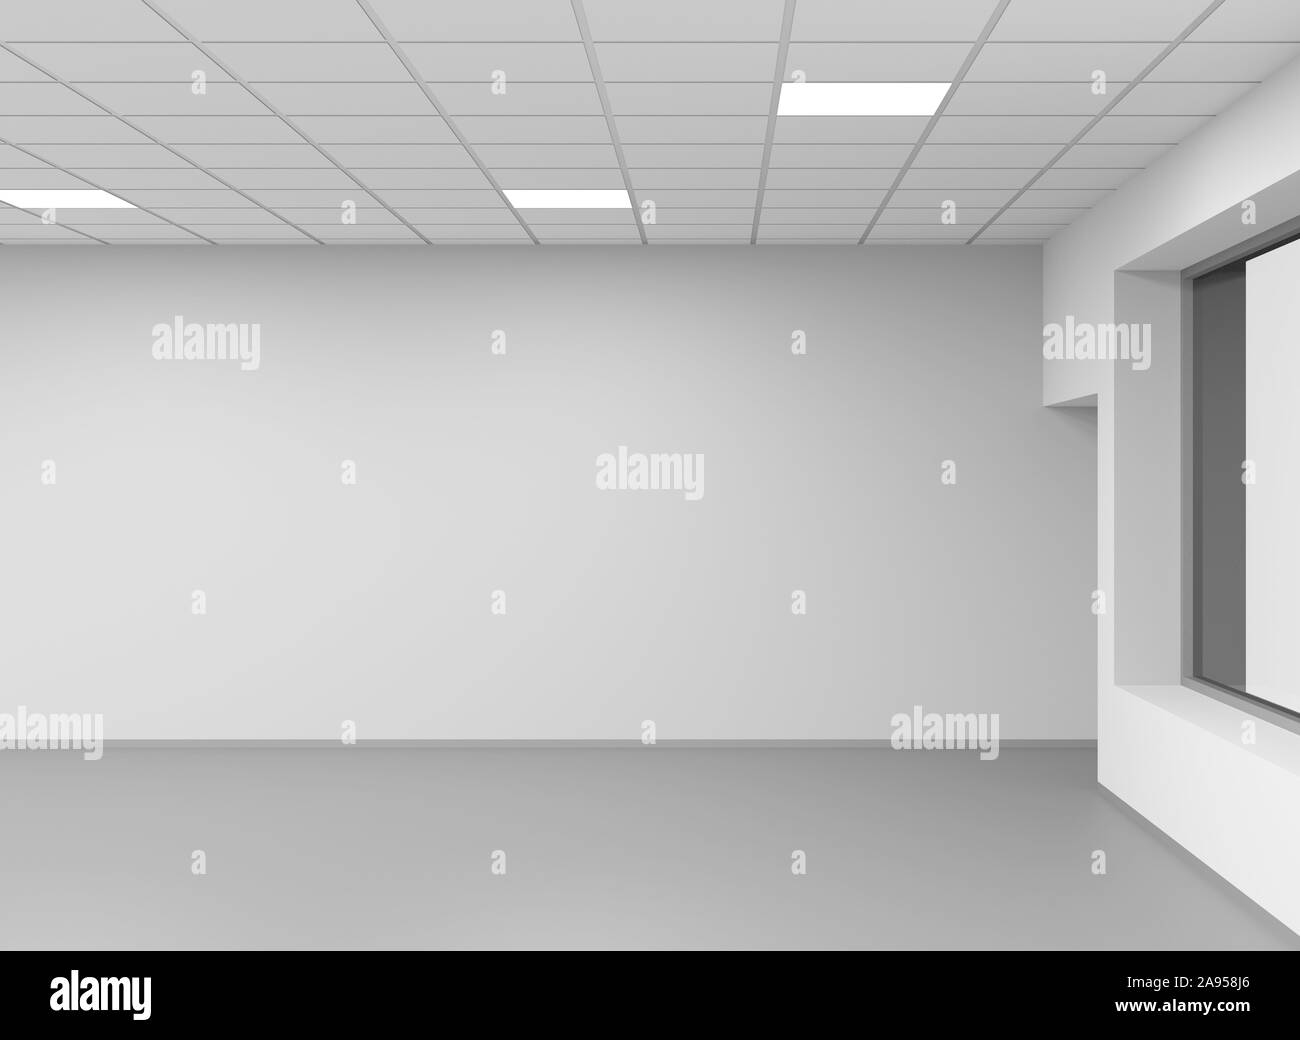 Abstract empty open space office interior fragment, 3d rendering illustration Stock Photo